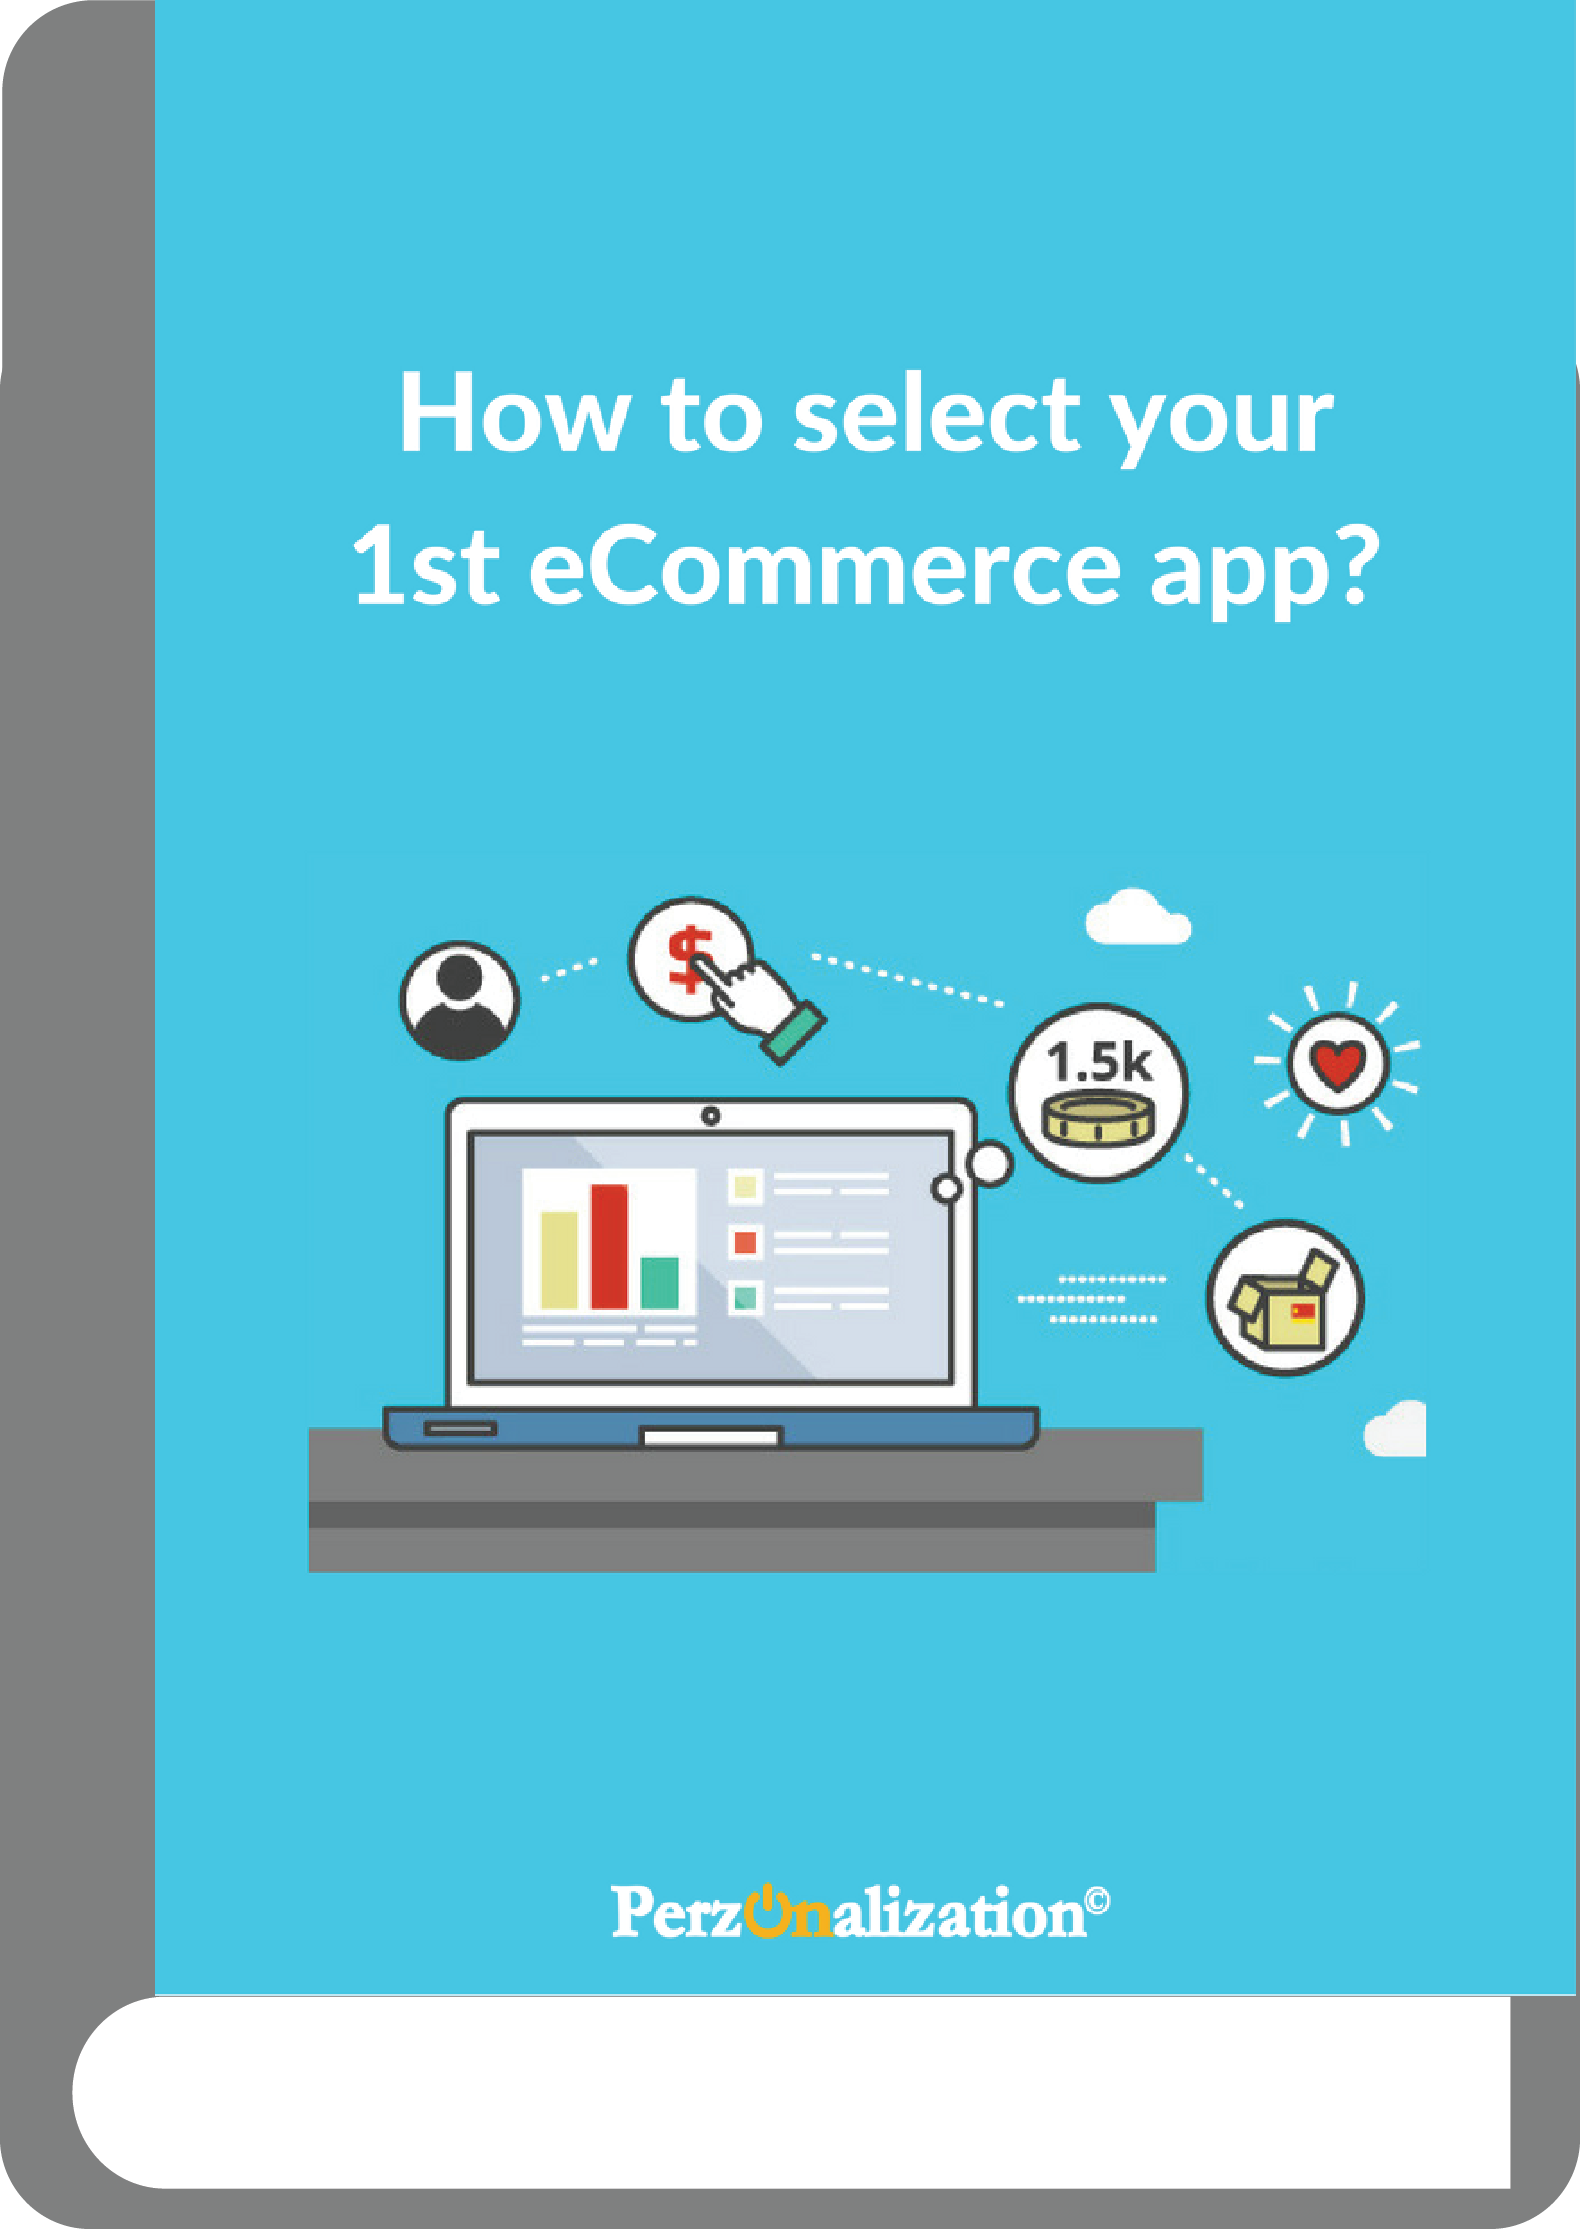 What is an eCommerce app and how can it help you reach your targets?